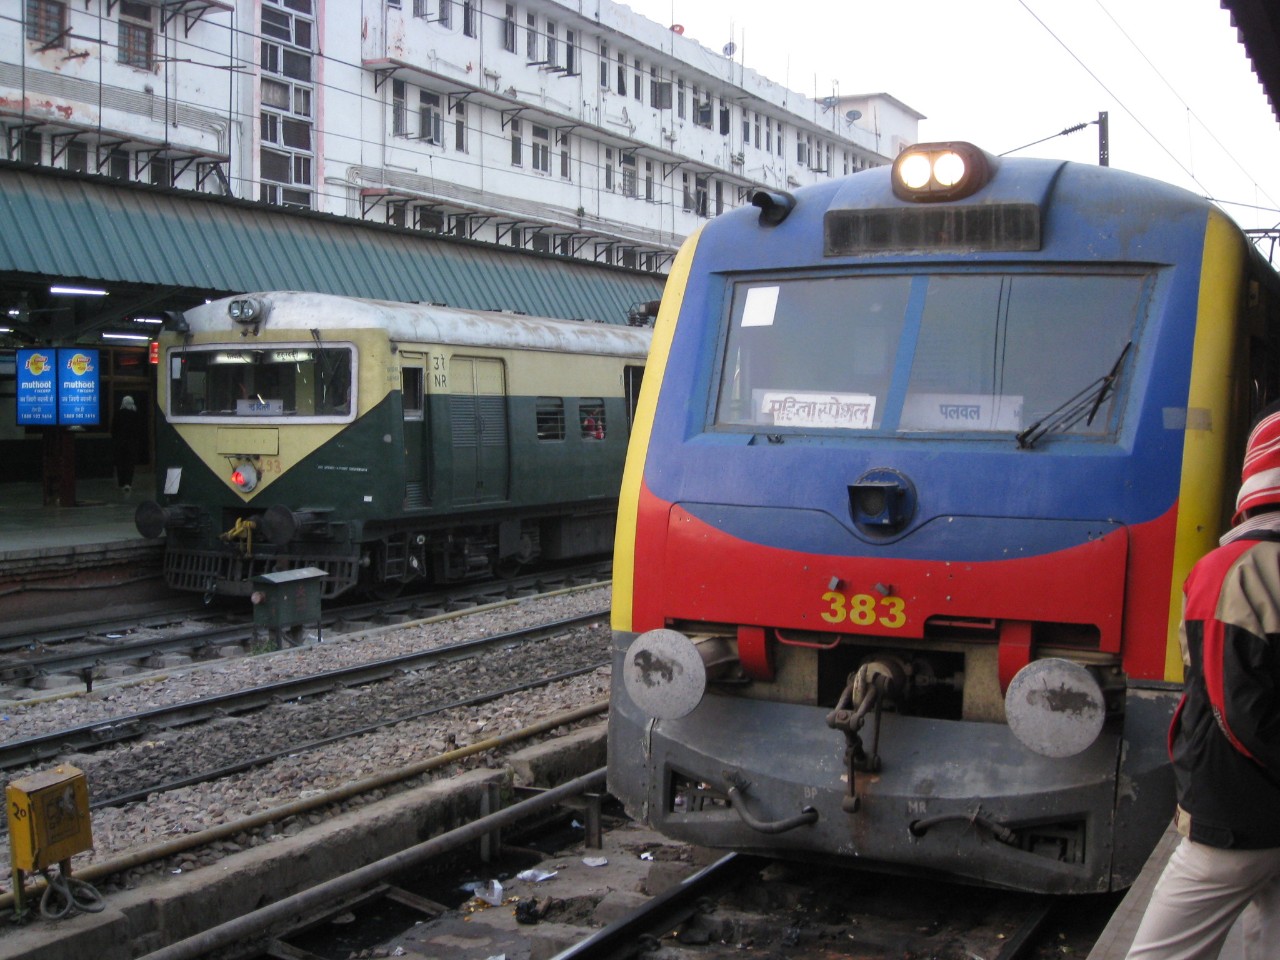 EMU trains in NCR to get better facilities